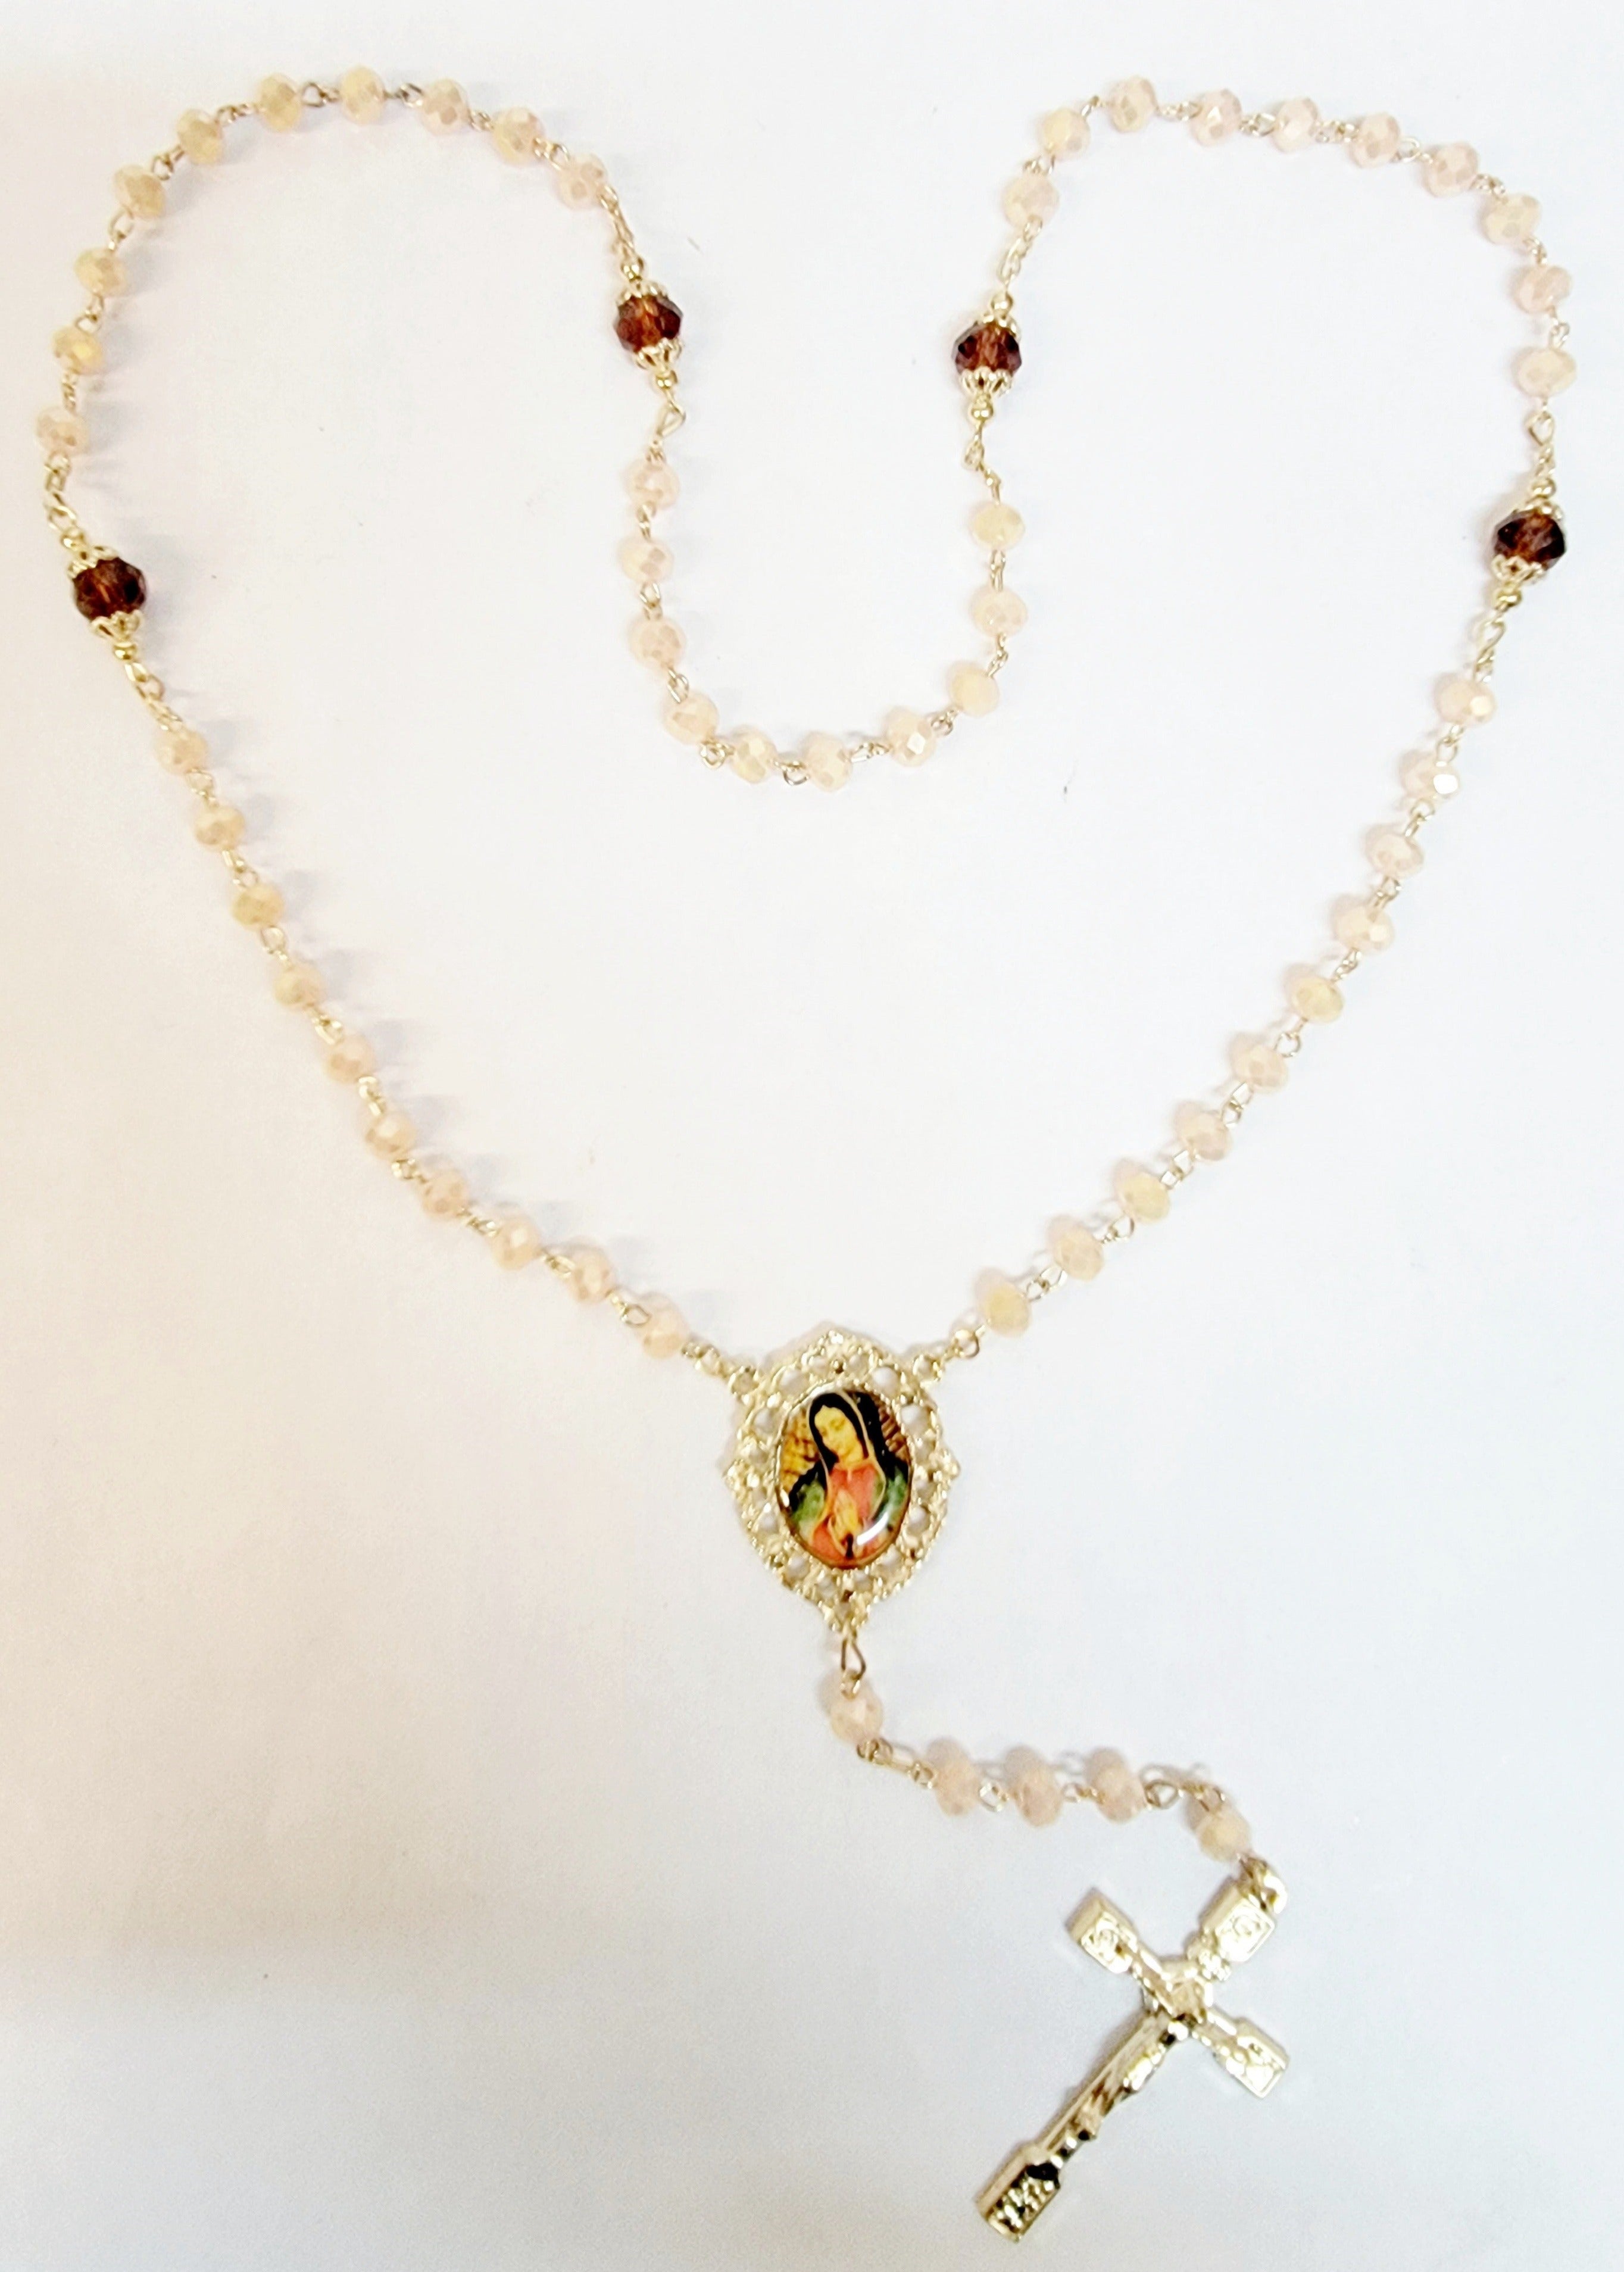 Our Lady of Guadalupe Crystal Peach Rosary